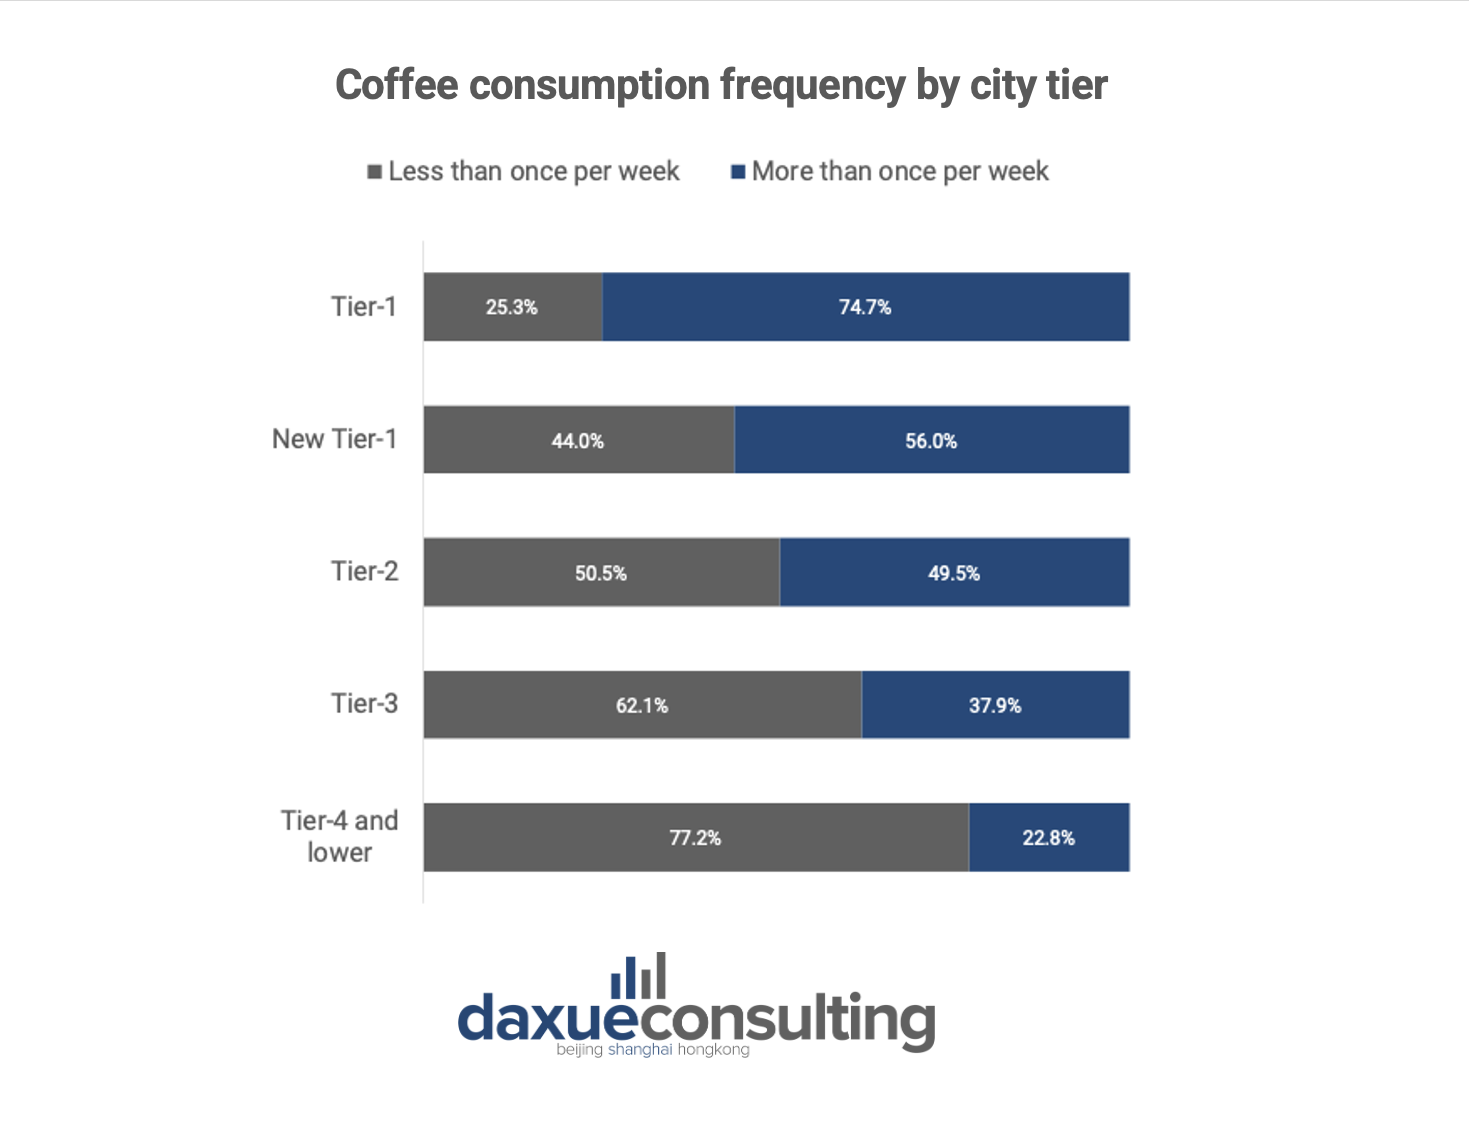 China's coffee market: How often Chinese consumers are drinking coffee in a week